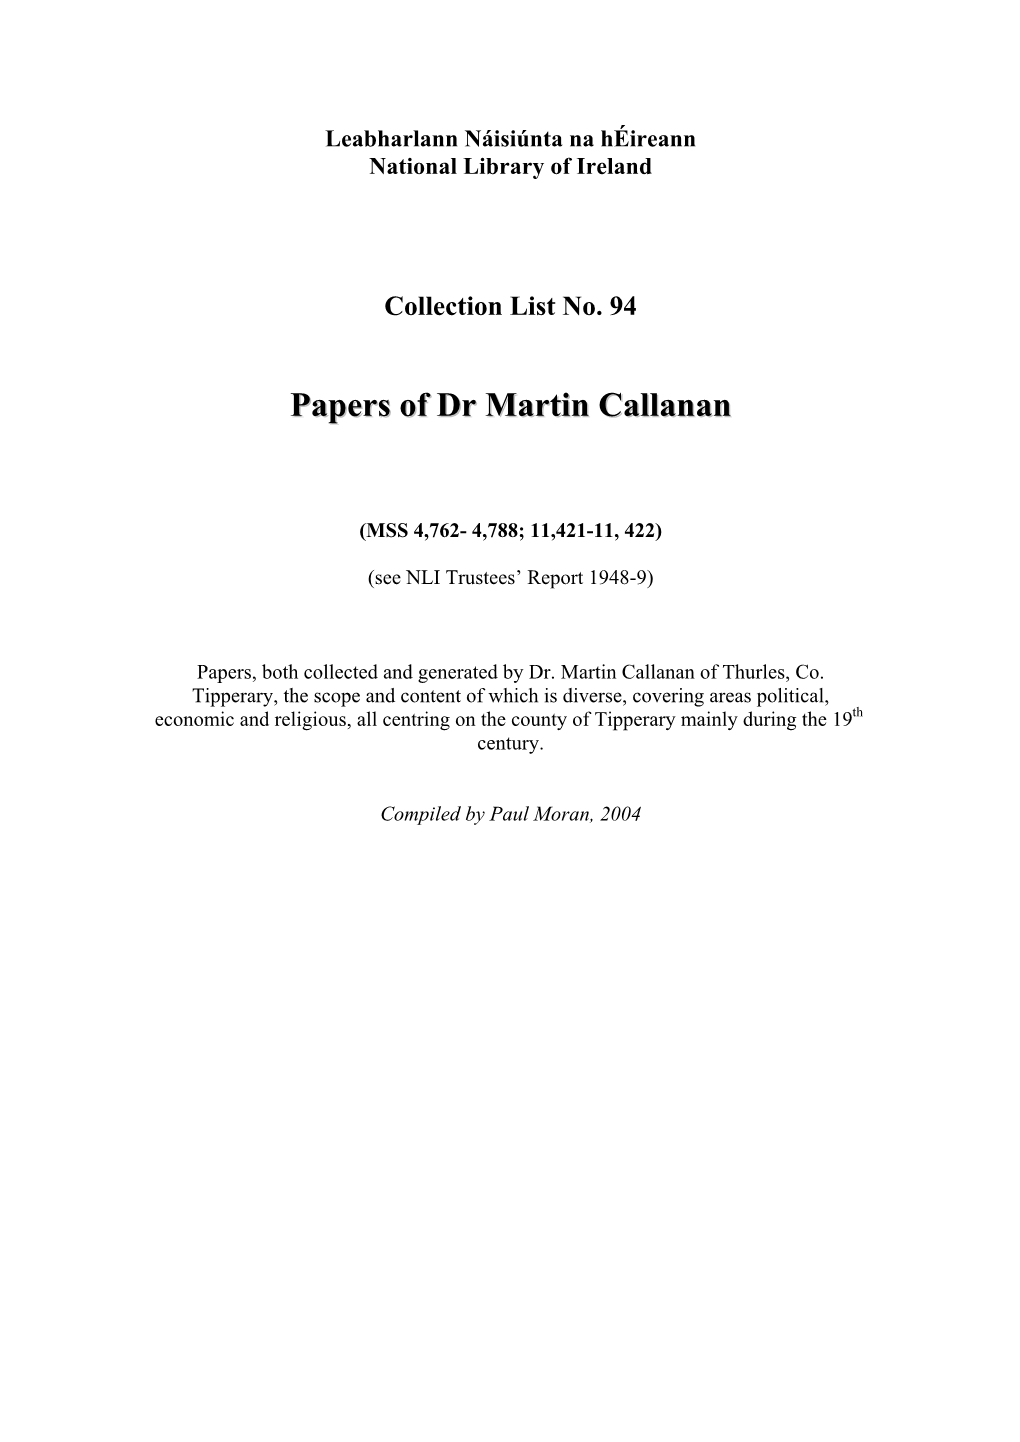 Papers of Dr Martin Callanan